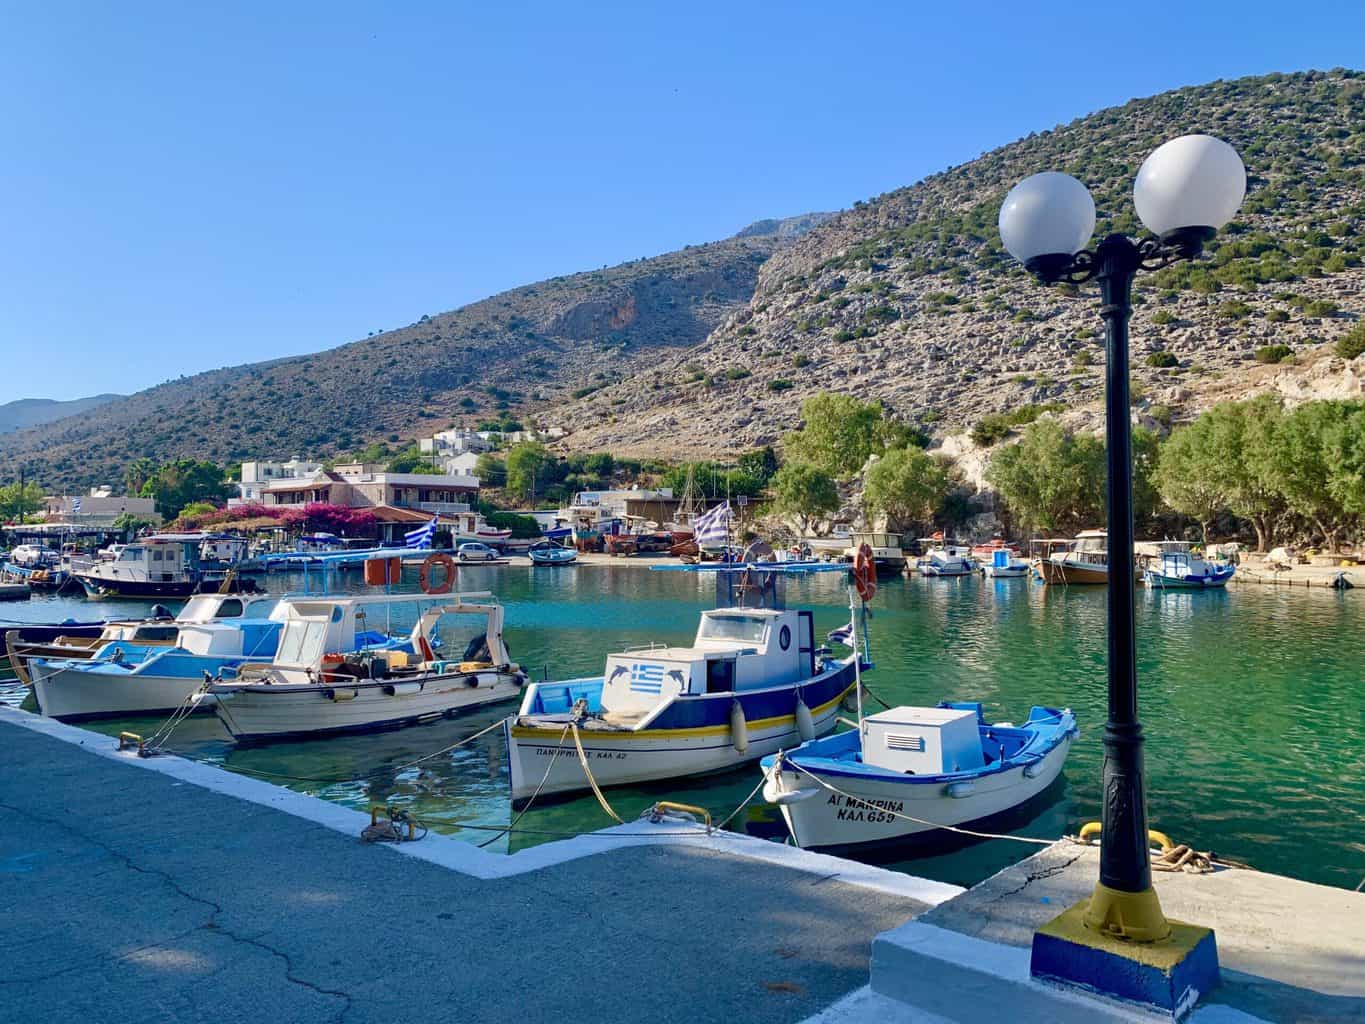 kalymnos, Skyscanner names Greece as one of the top travel destinations for 2021